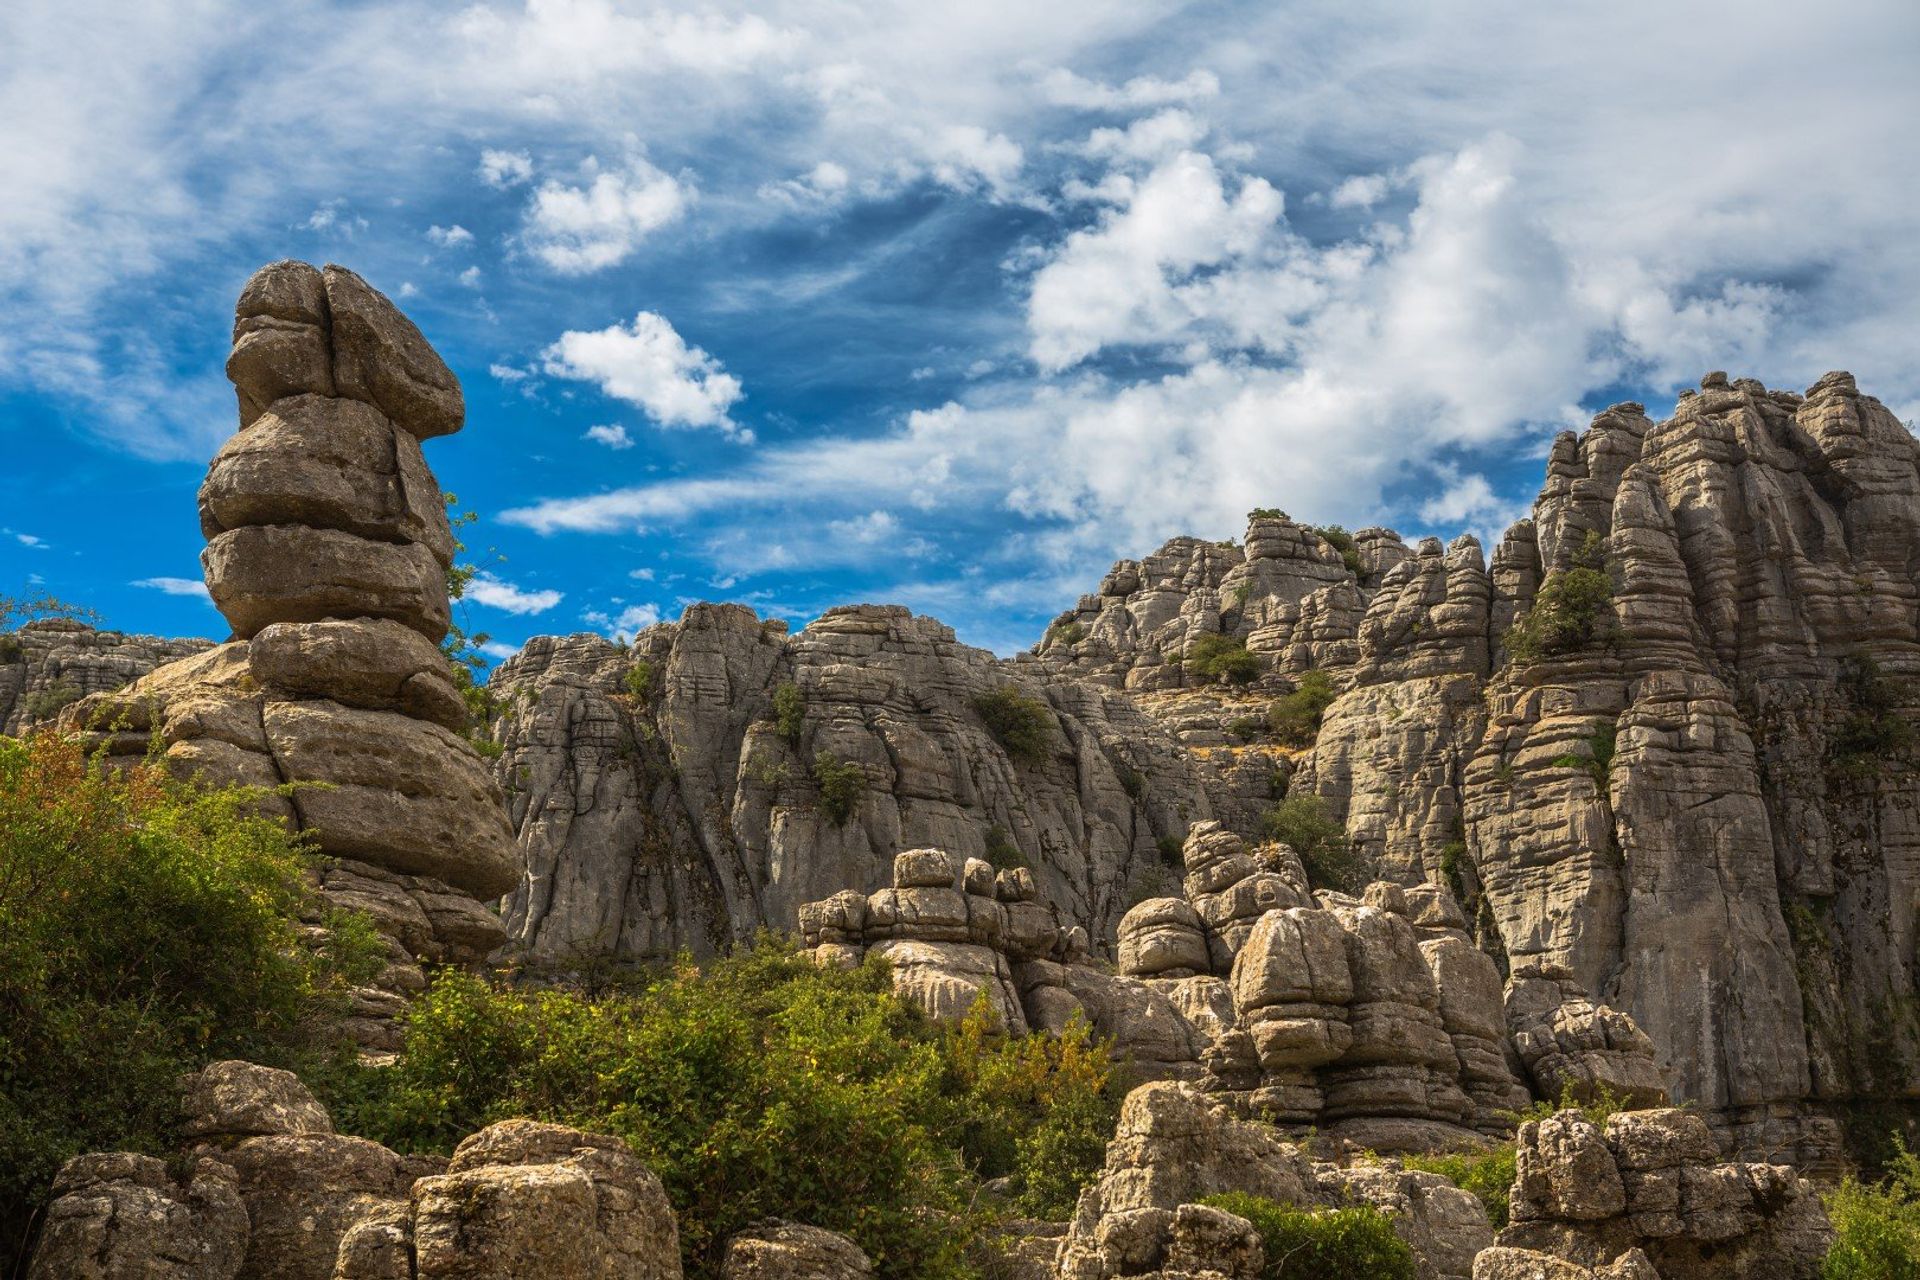 El Torcal Nature Reserve in Antequera, near Malaga is a UNESCO World Heritage Site